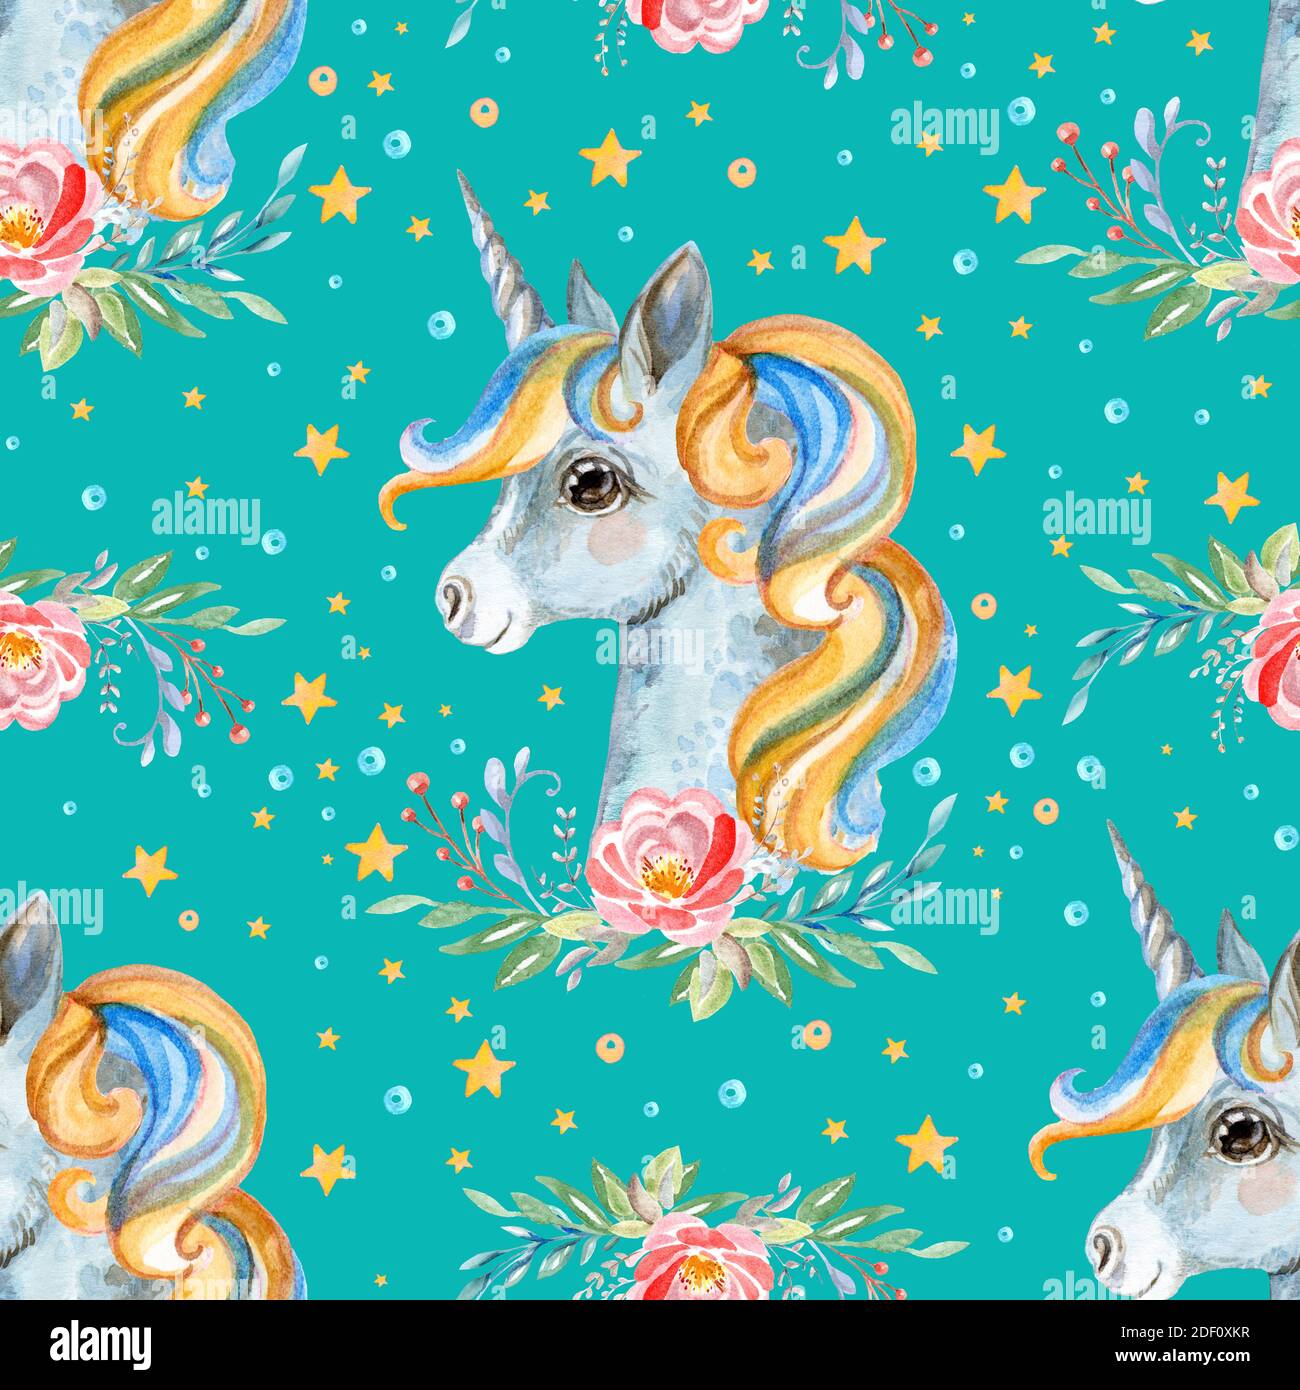 Cute unicorn with rose flower and stars isolated on turquoise background. Watercolor seamless pattern. Illustration for party, print, fabric, wallpape Stock Photo